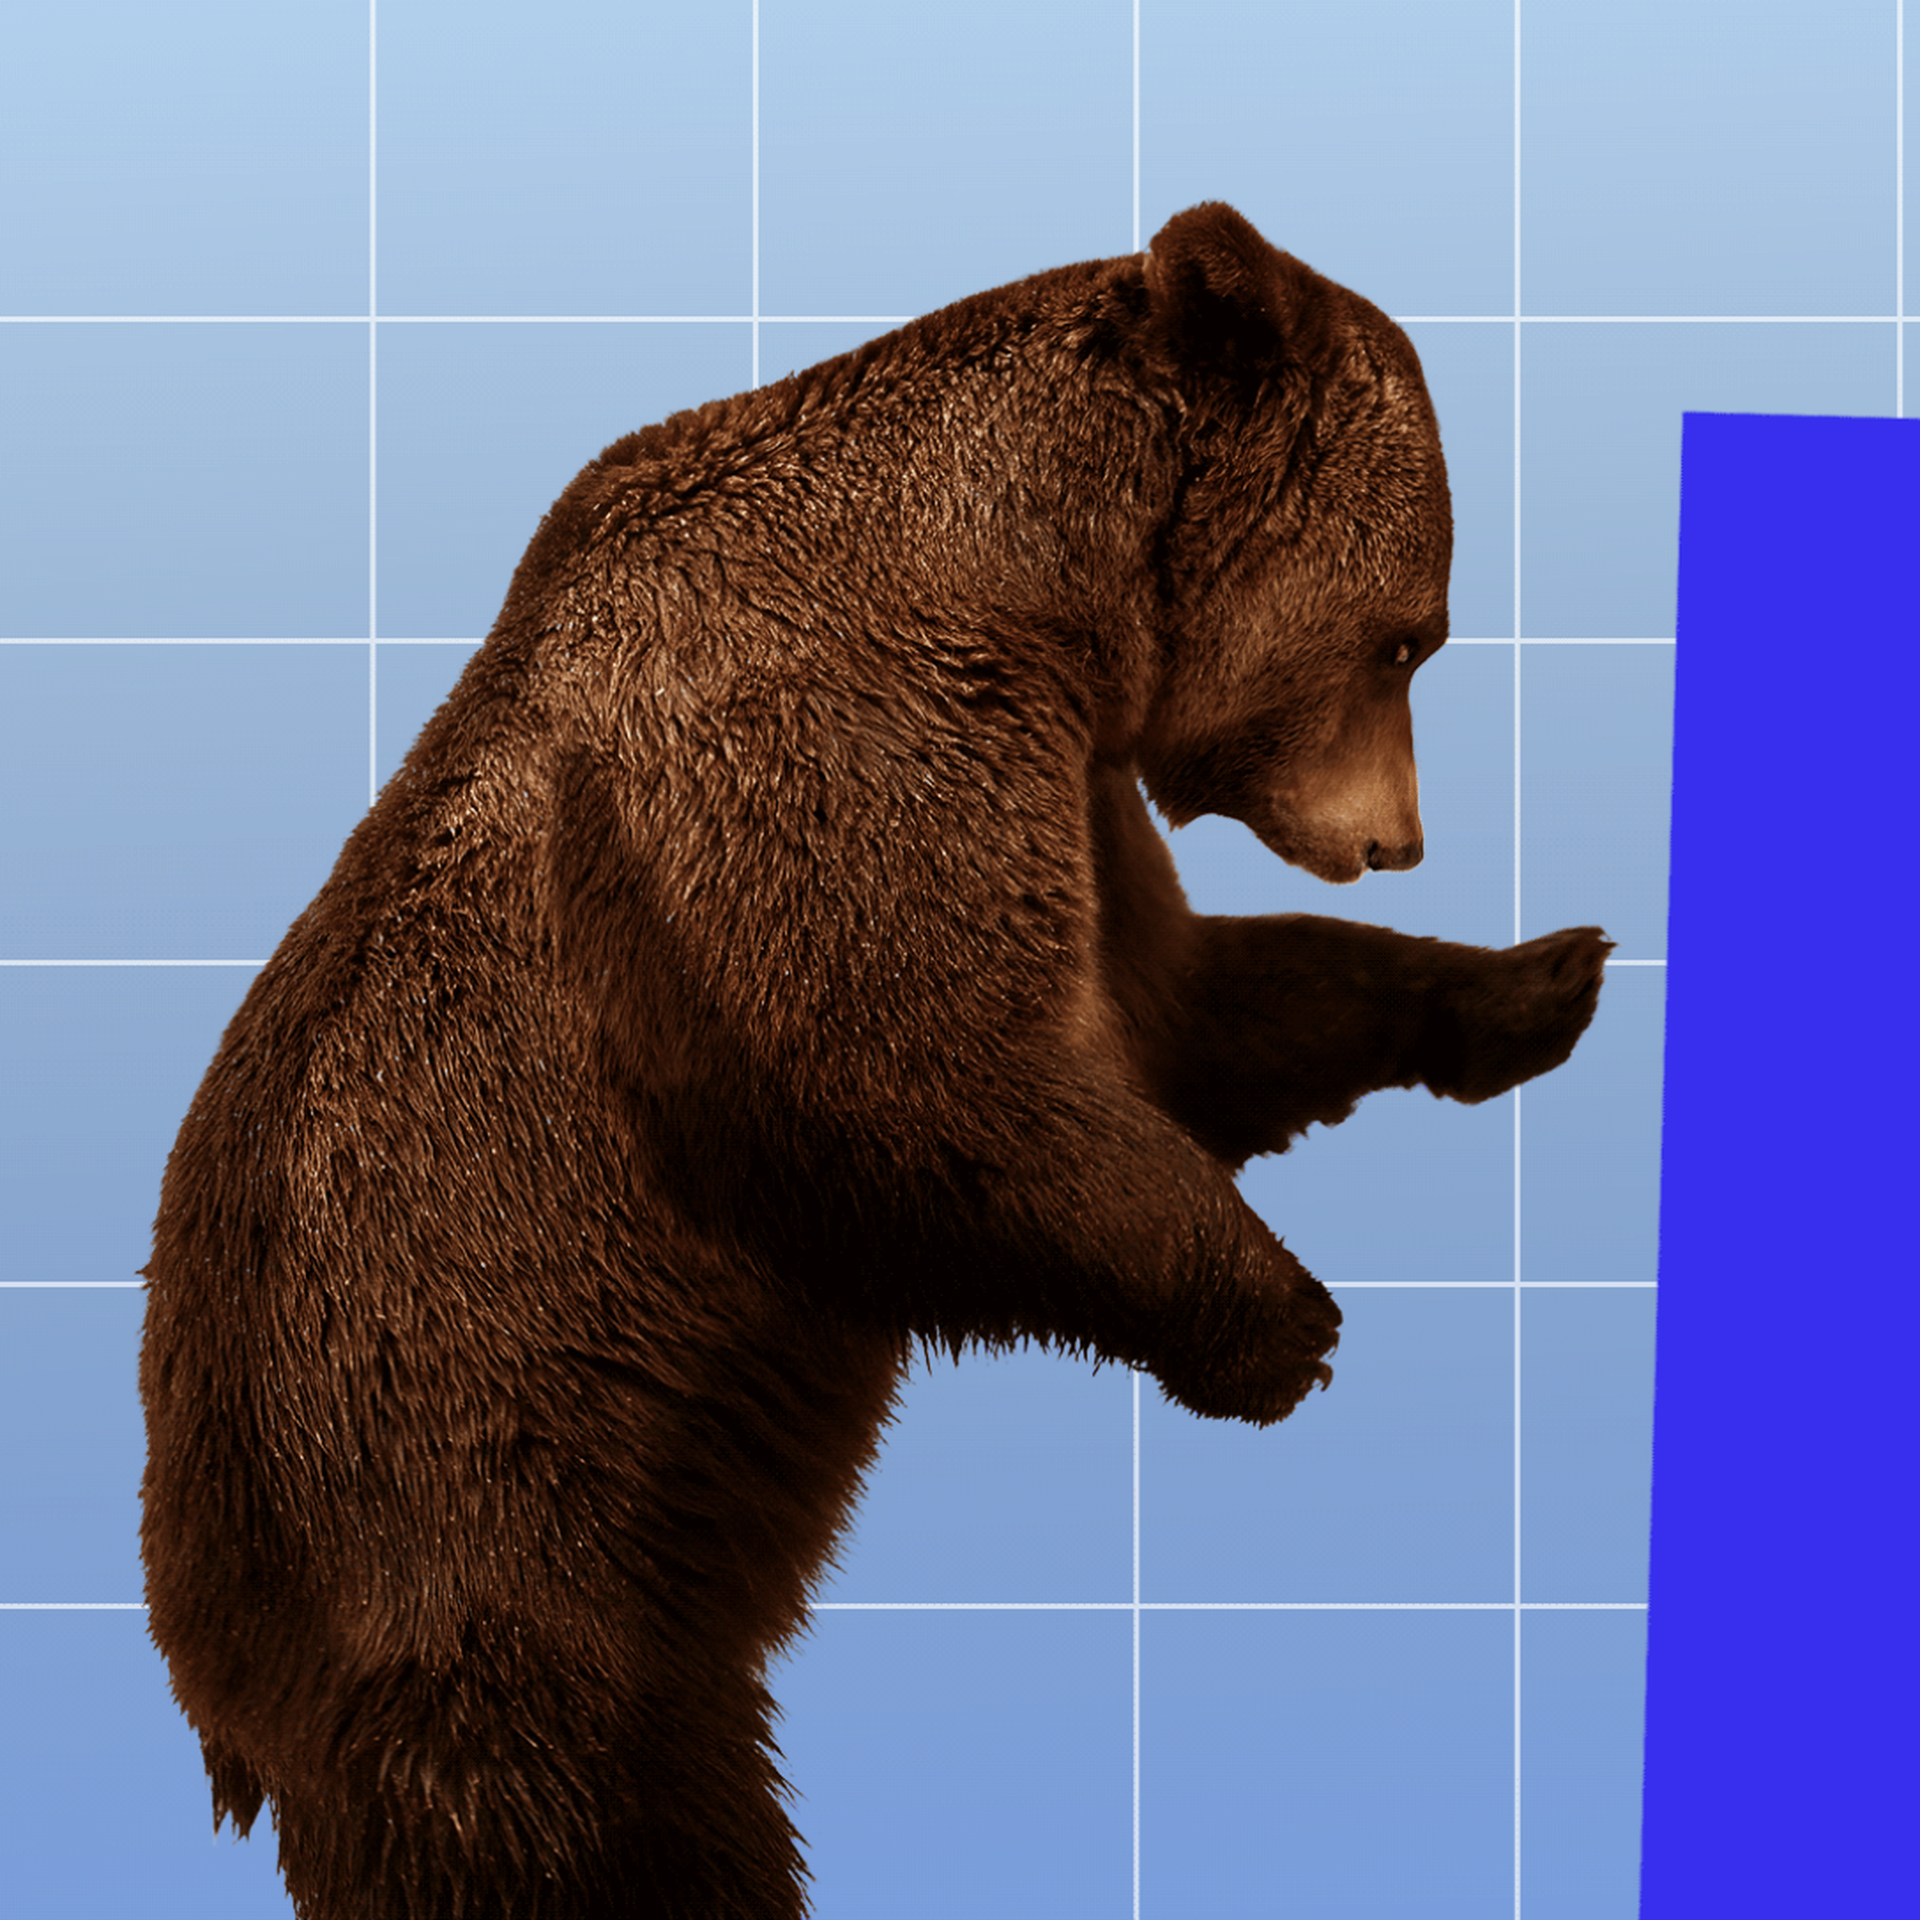 An illustration of a bear pushing a line in a bar graph